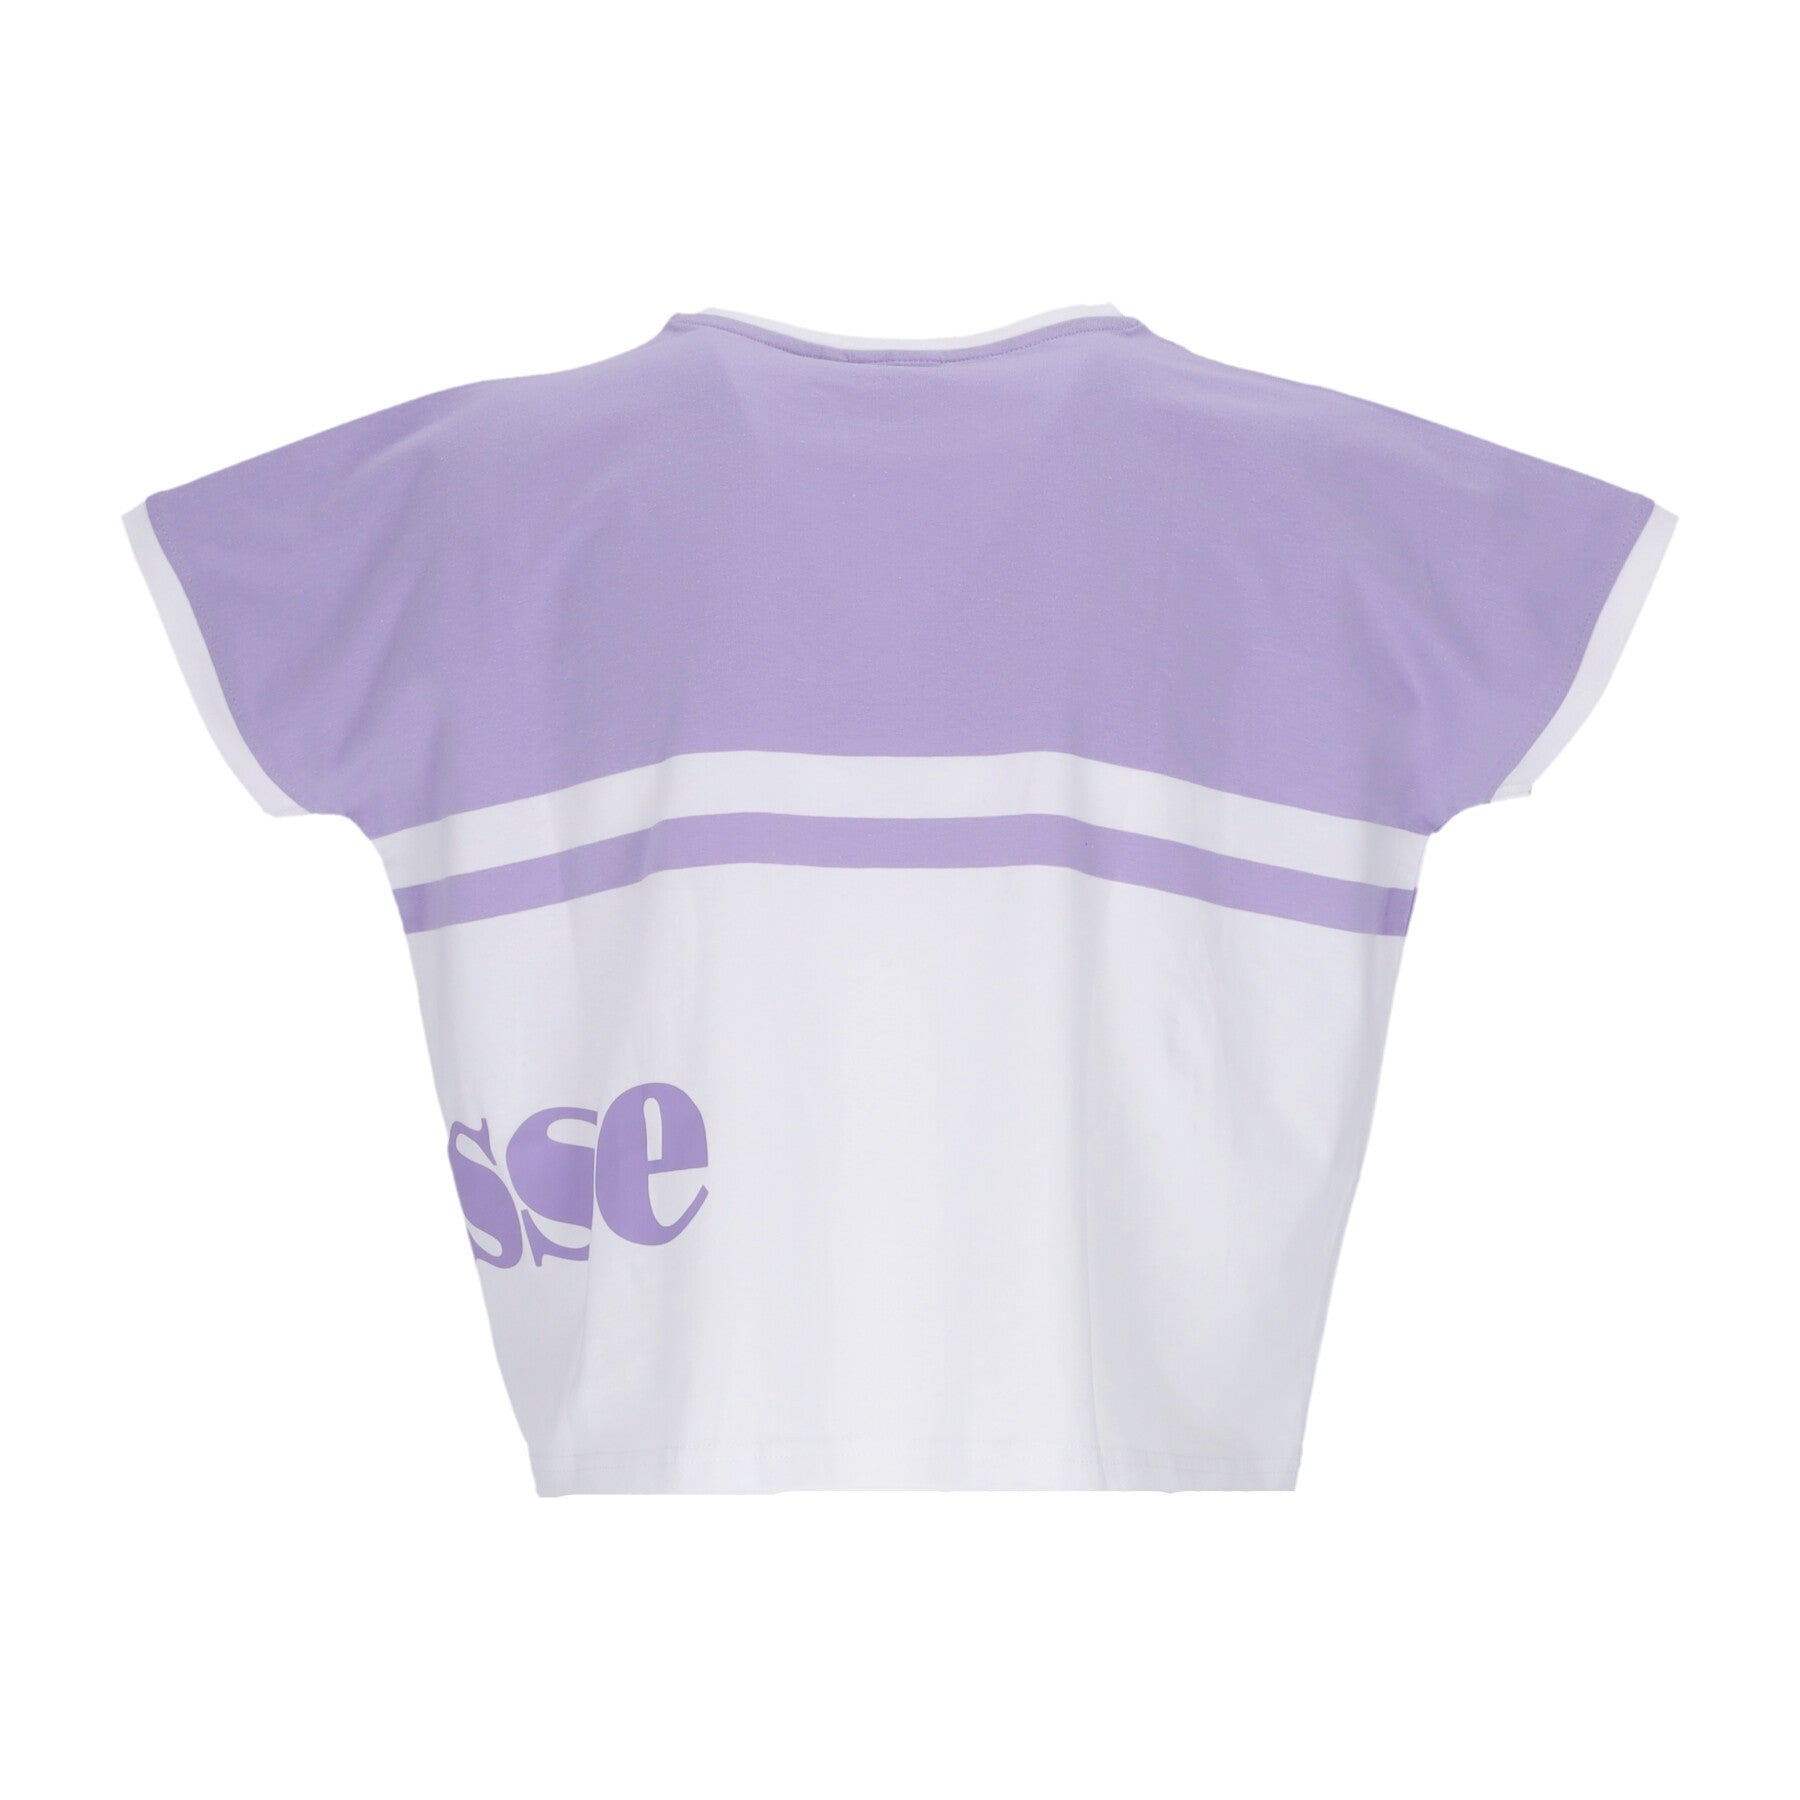 Lavender Tee Women's Cropped T-Shirt